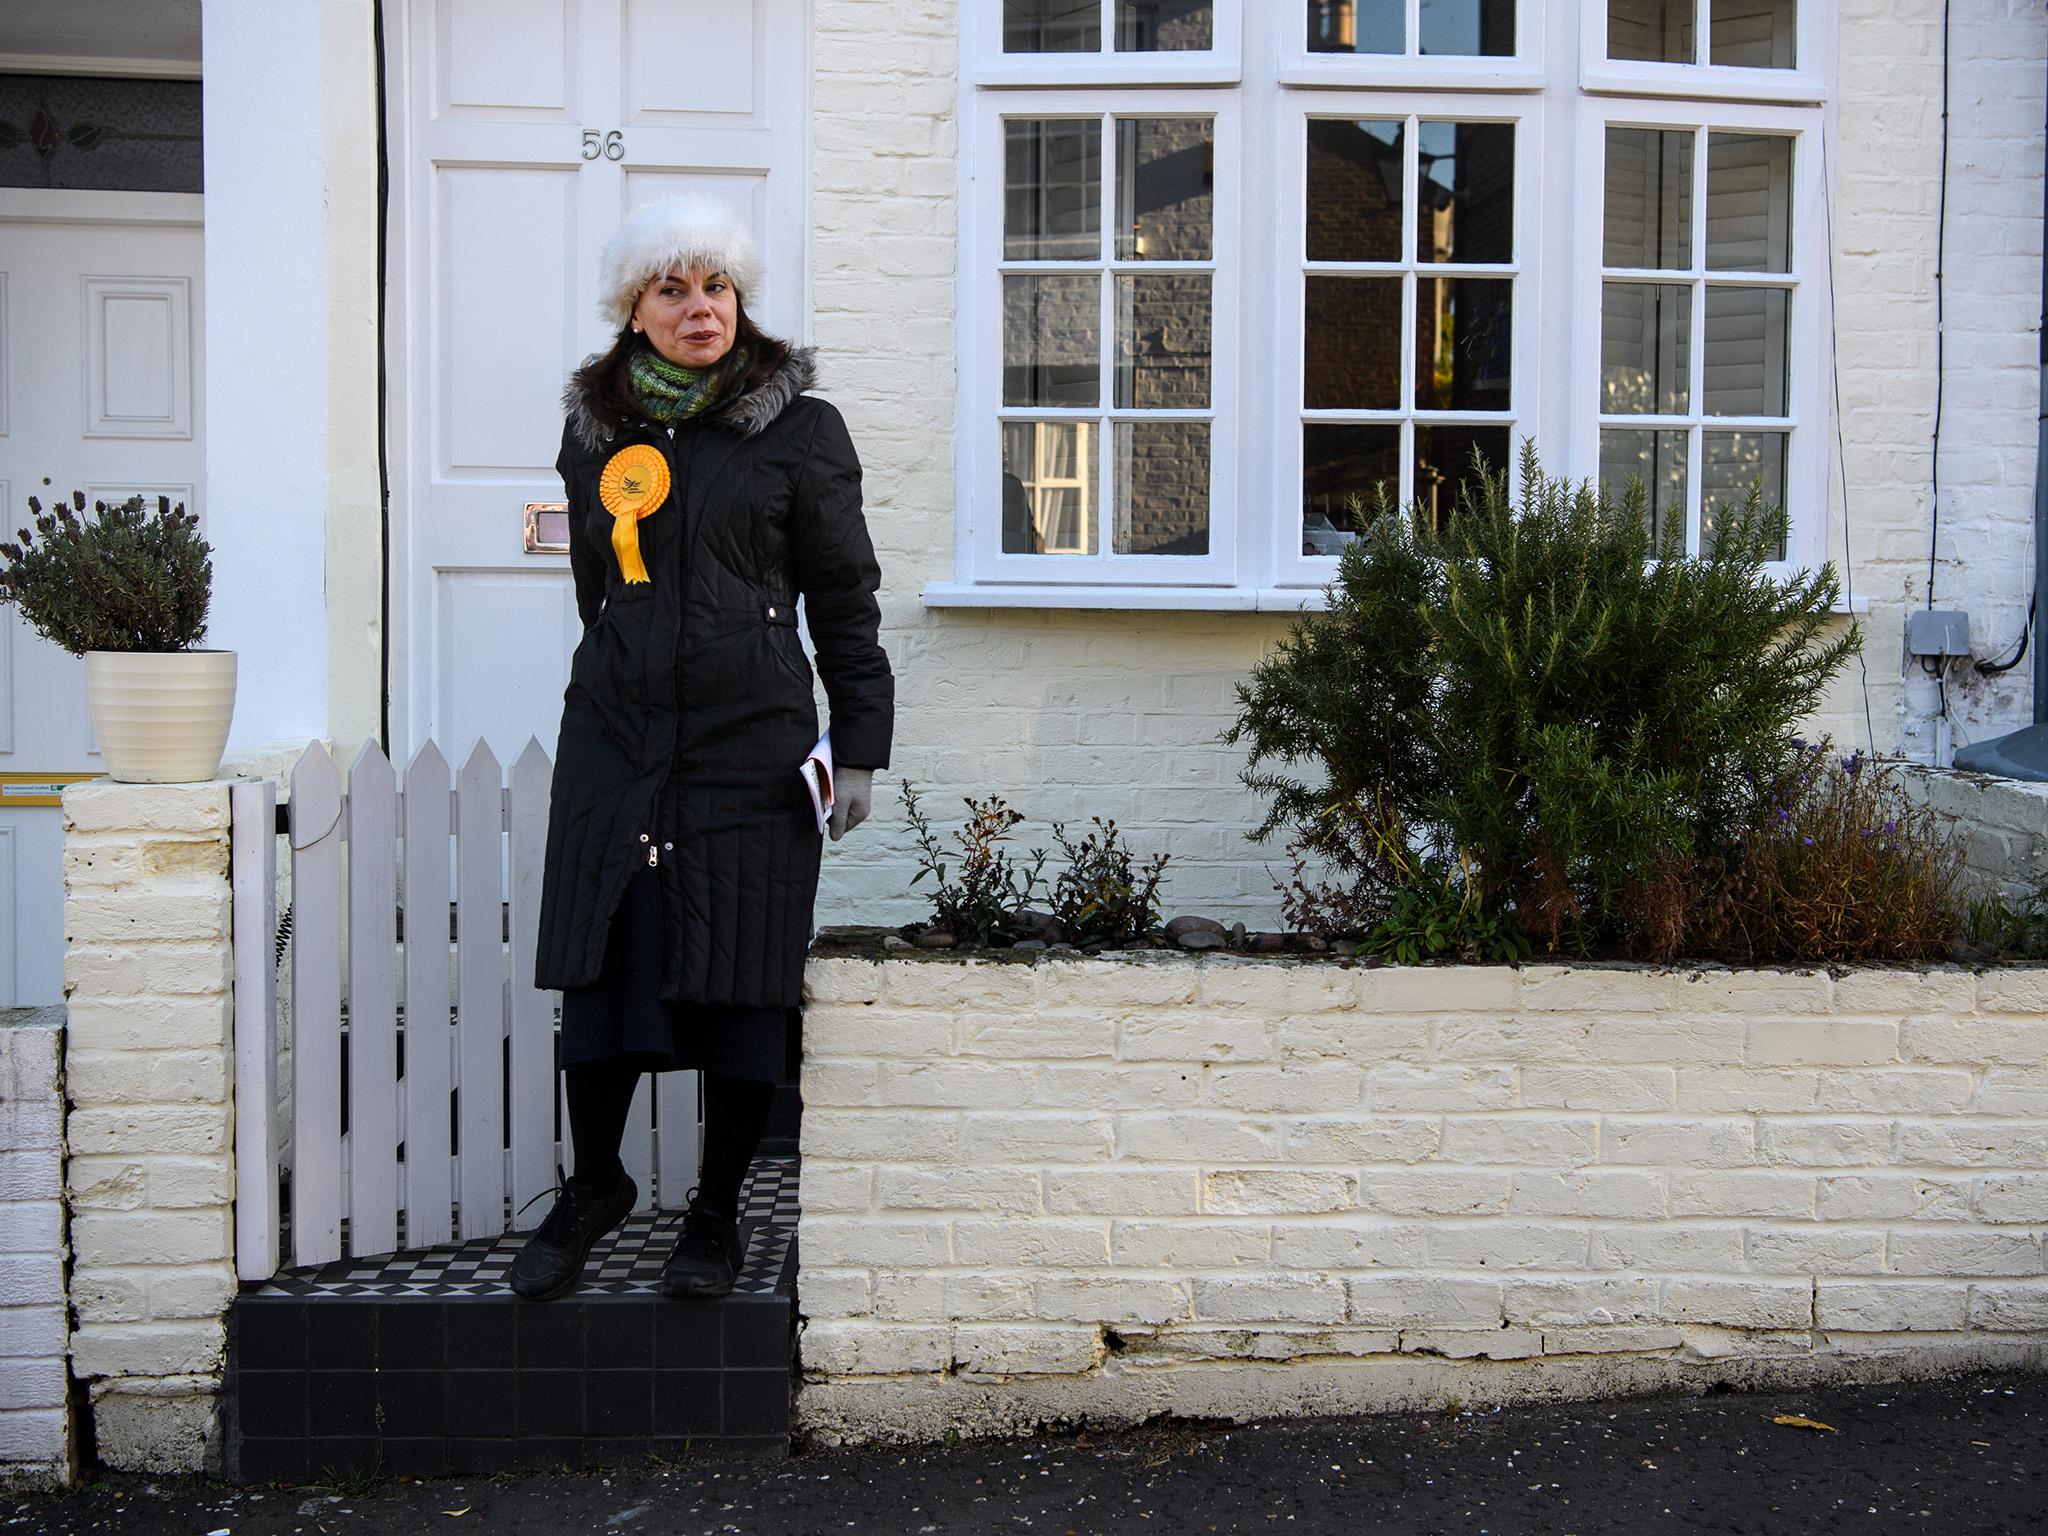 Liberal Democrat prospective parliamentary candidate, Sarah Olney, canvasses ahead of the Richmond Park and North Kingston by-election